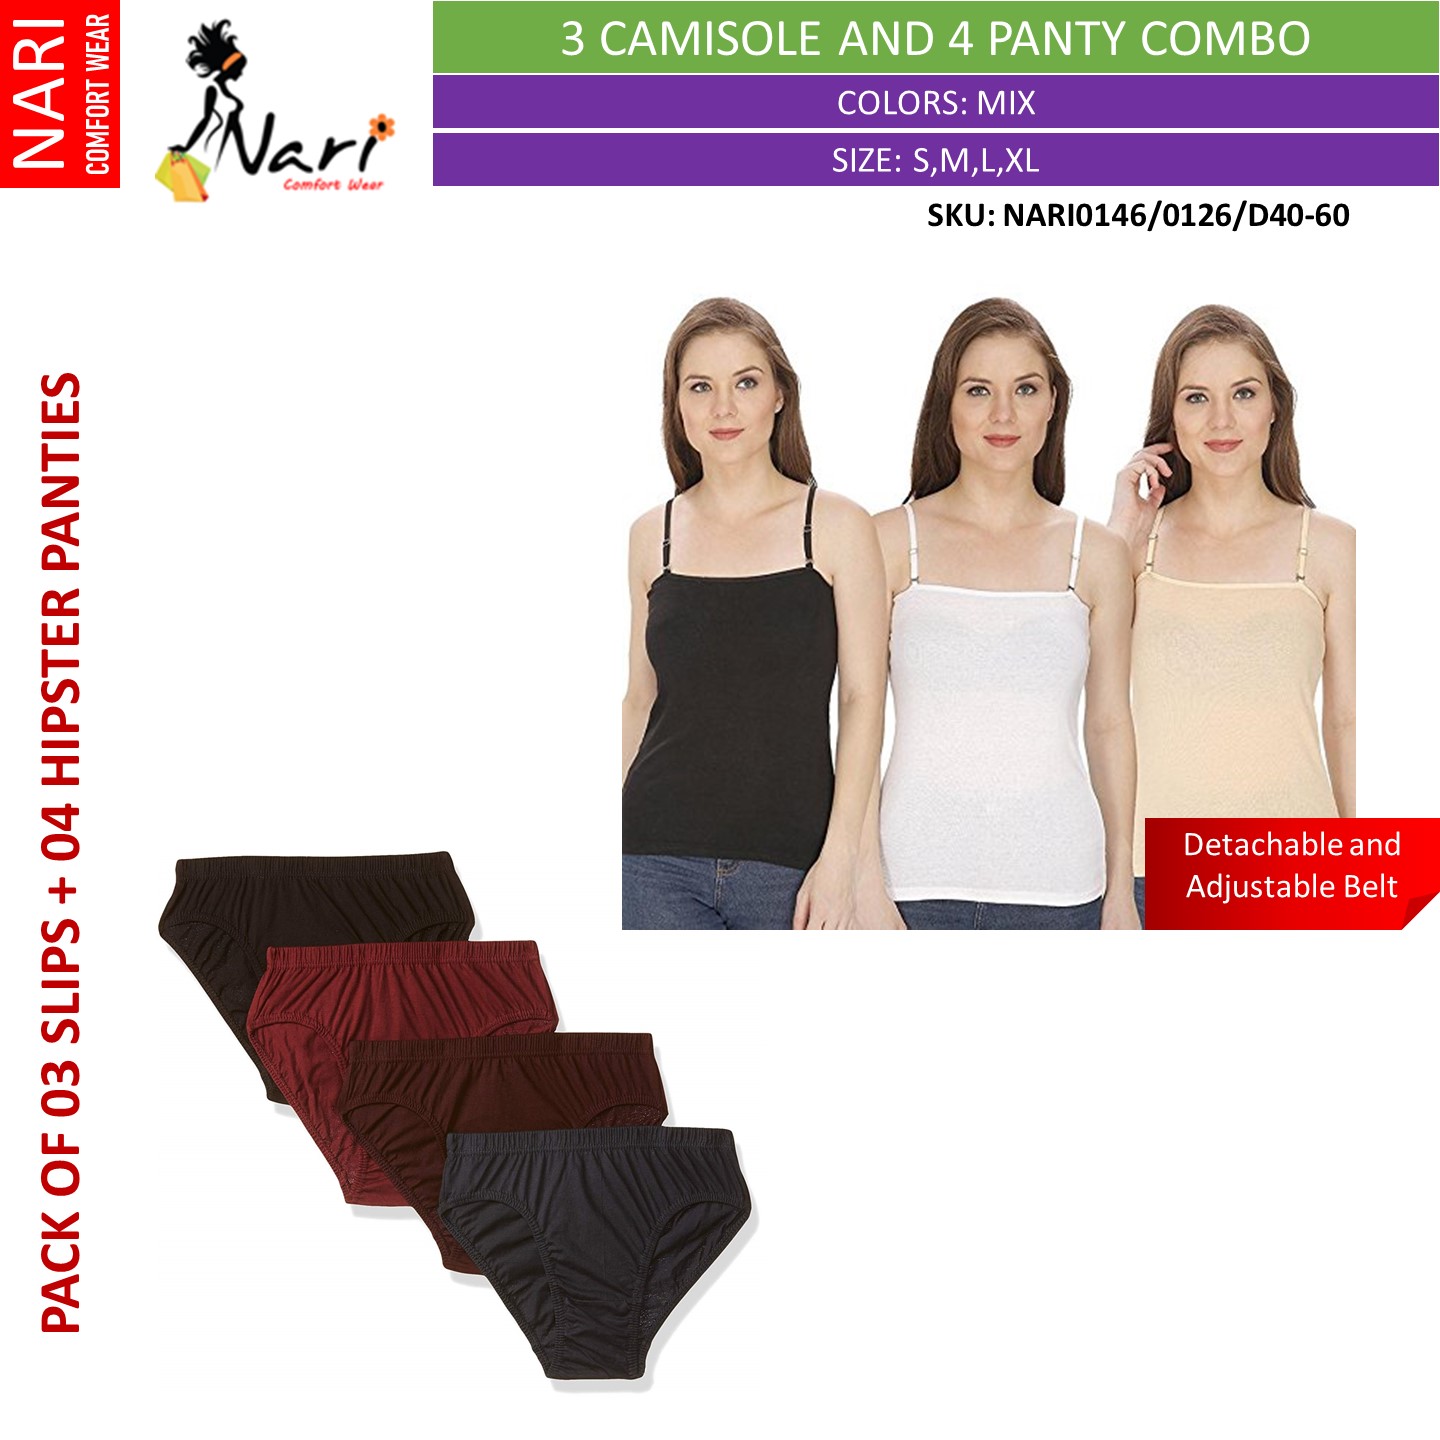 https://naricomfortwear.com/wp-content/uploads/2021/05/3-CAMISOLE-AND-4-PANTY-COMBO.jpg